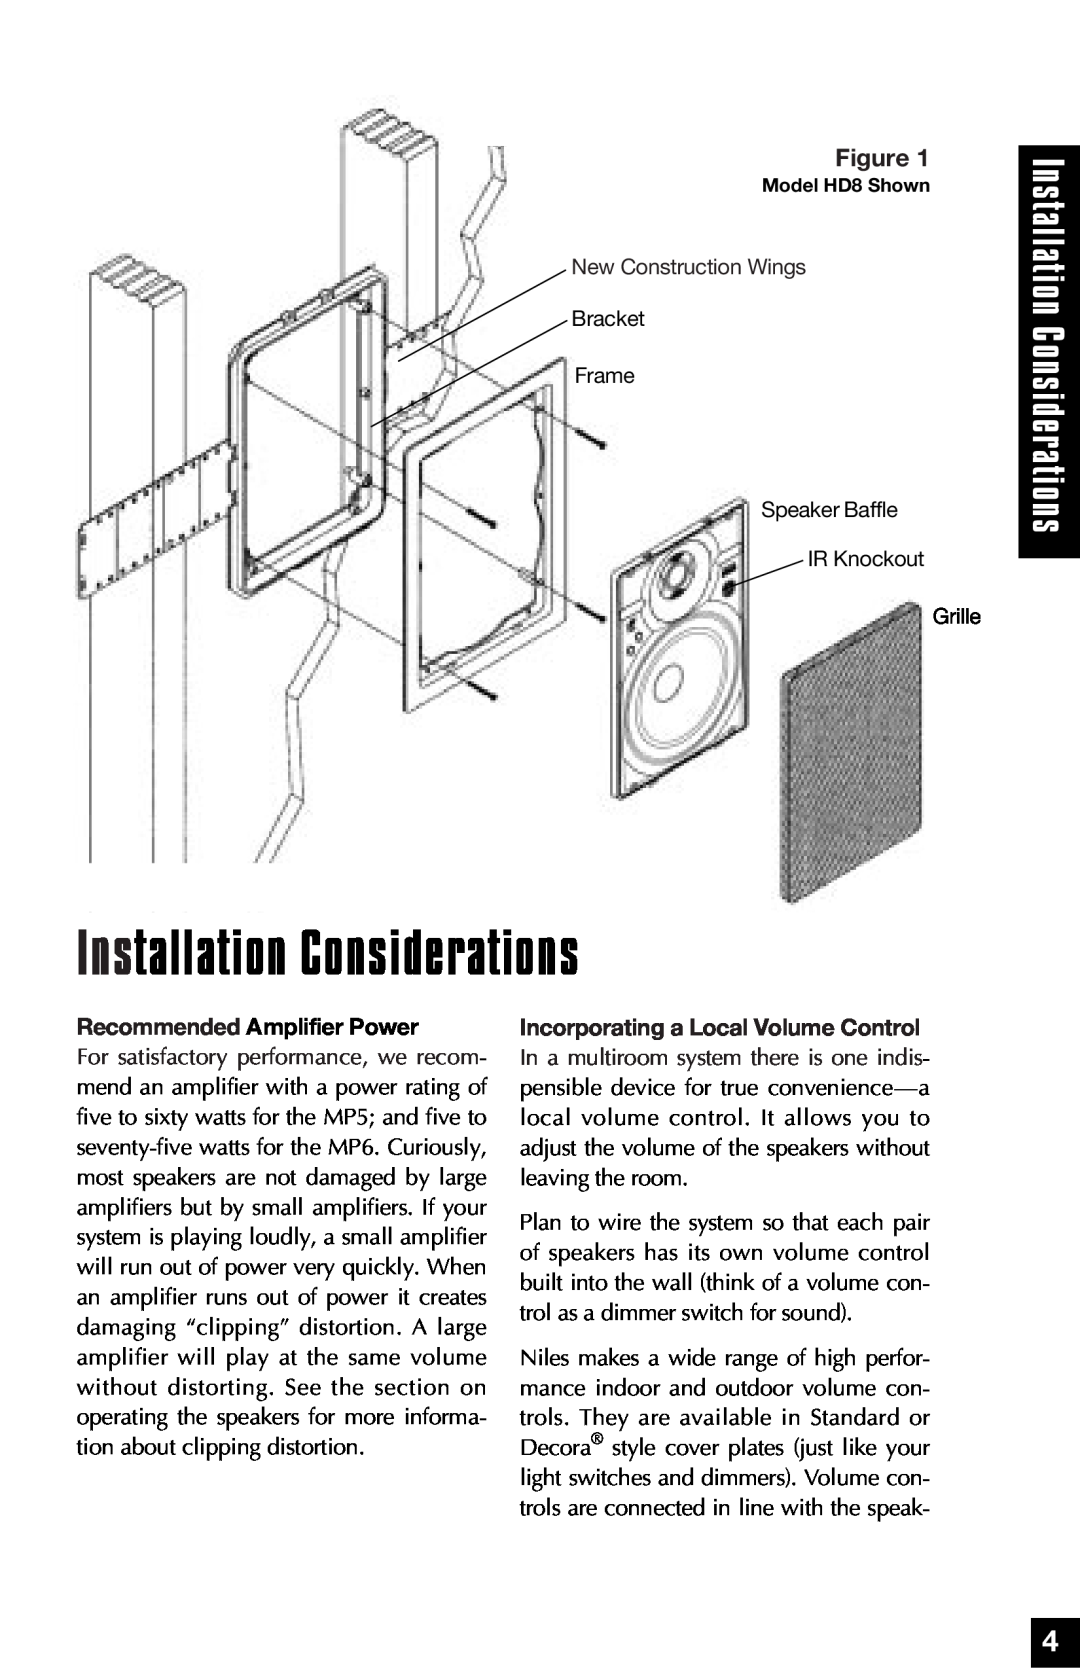 Niles Audio MP5, MP6 manual Installation Considerations, New Construction Wings, Incorporating a Local Volume Control 